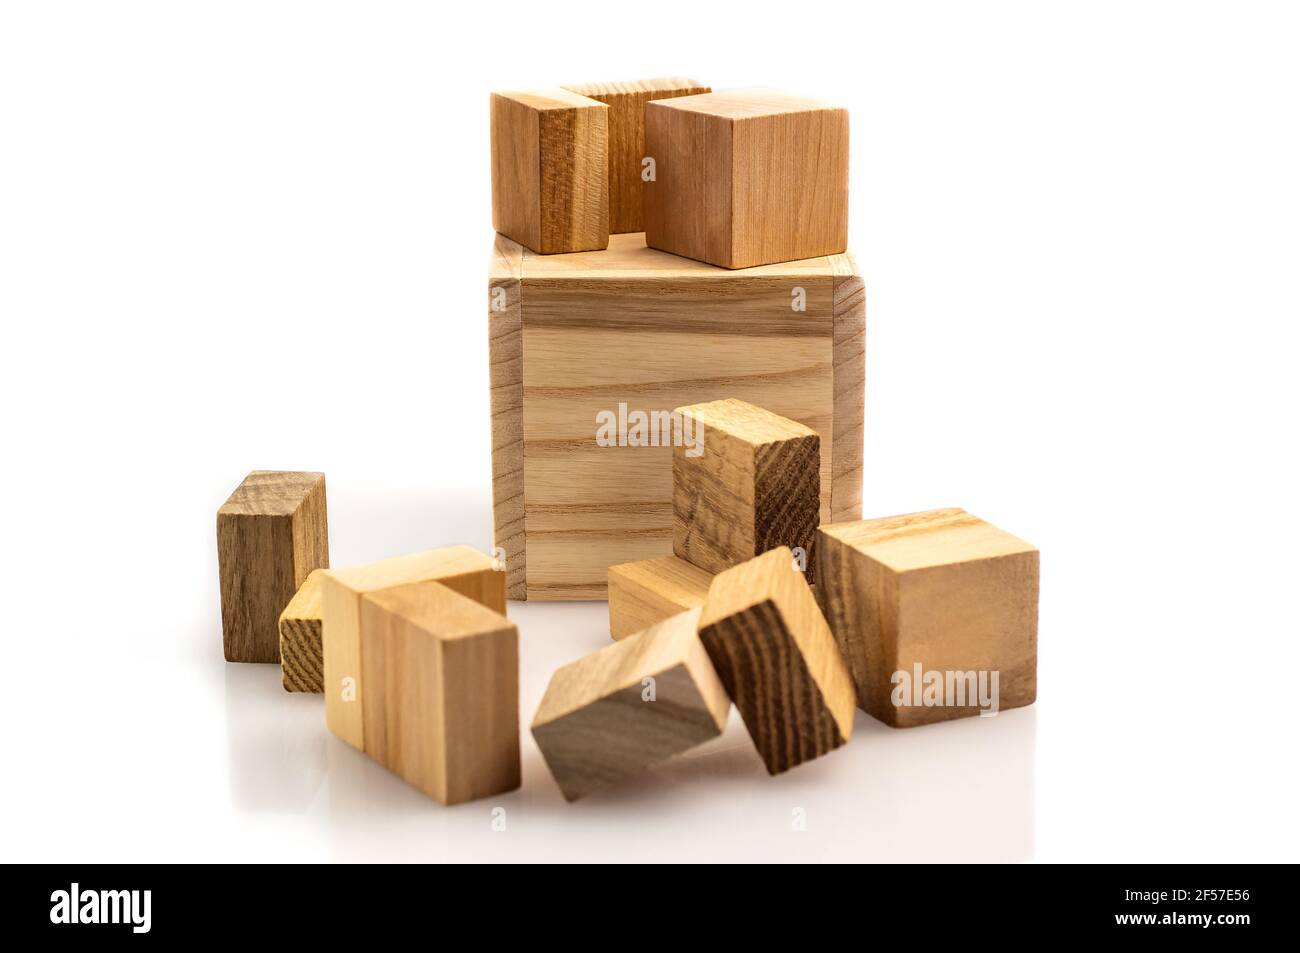 Wooden brain cube. Wooden puzzle made up of parts isolated on a white background. Business success concept. Layout for presentation. Stock Photo